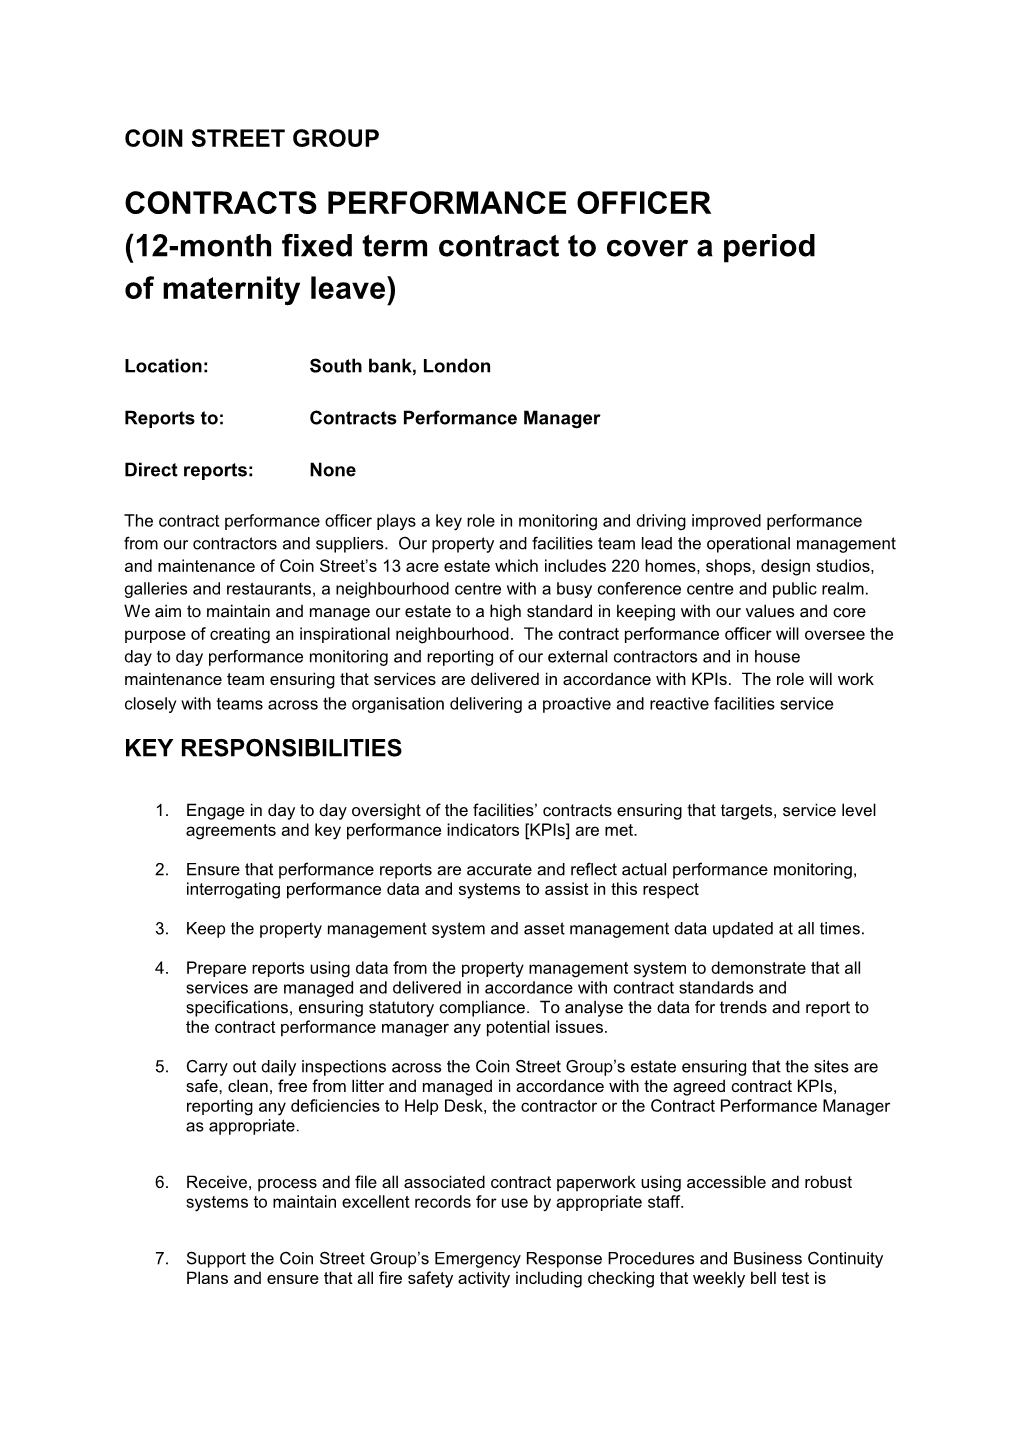 12-Month Fixed Term Contract to Cover a Period of Maternity Leave